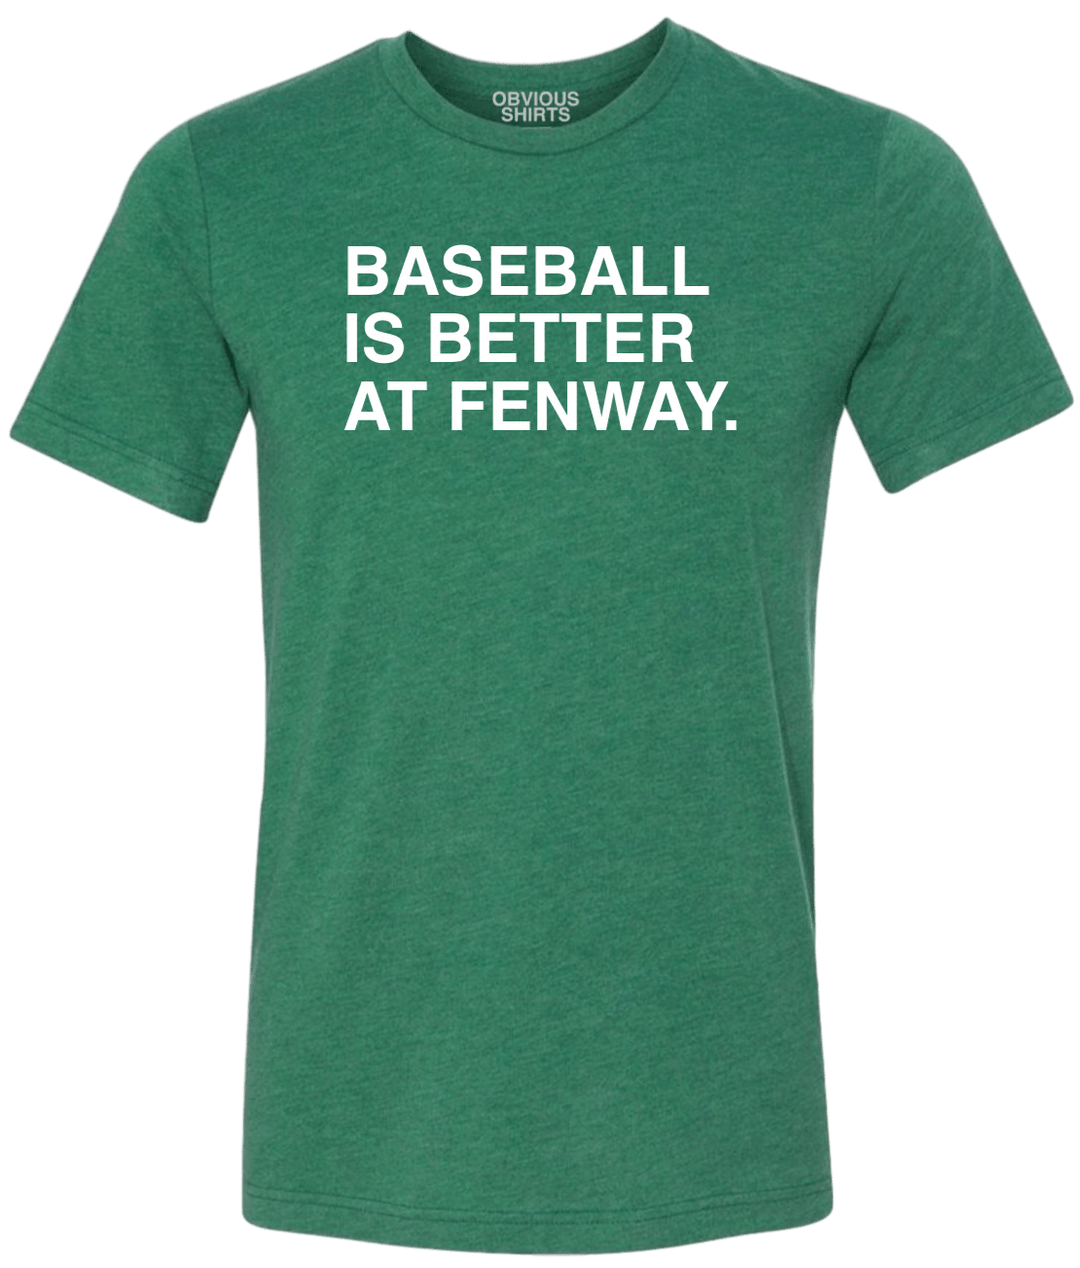 BASEBALL IS BETTER AT FENWAY. - OBVIOUS SHIRTS